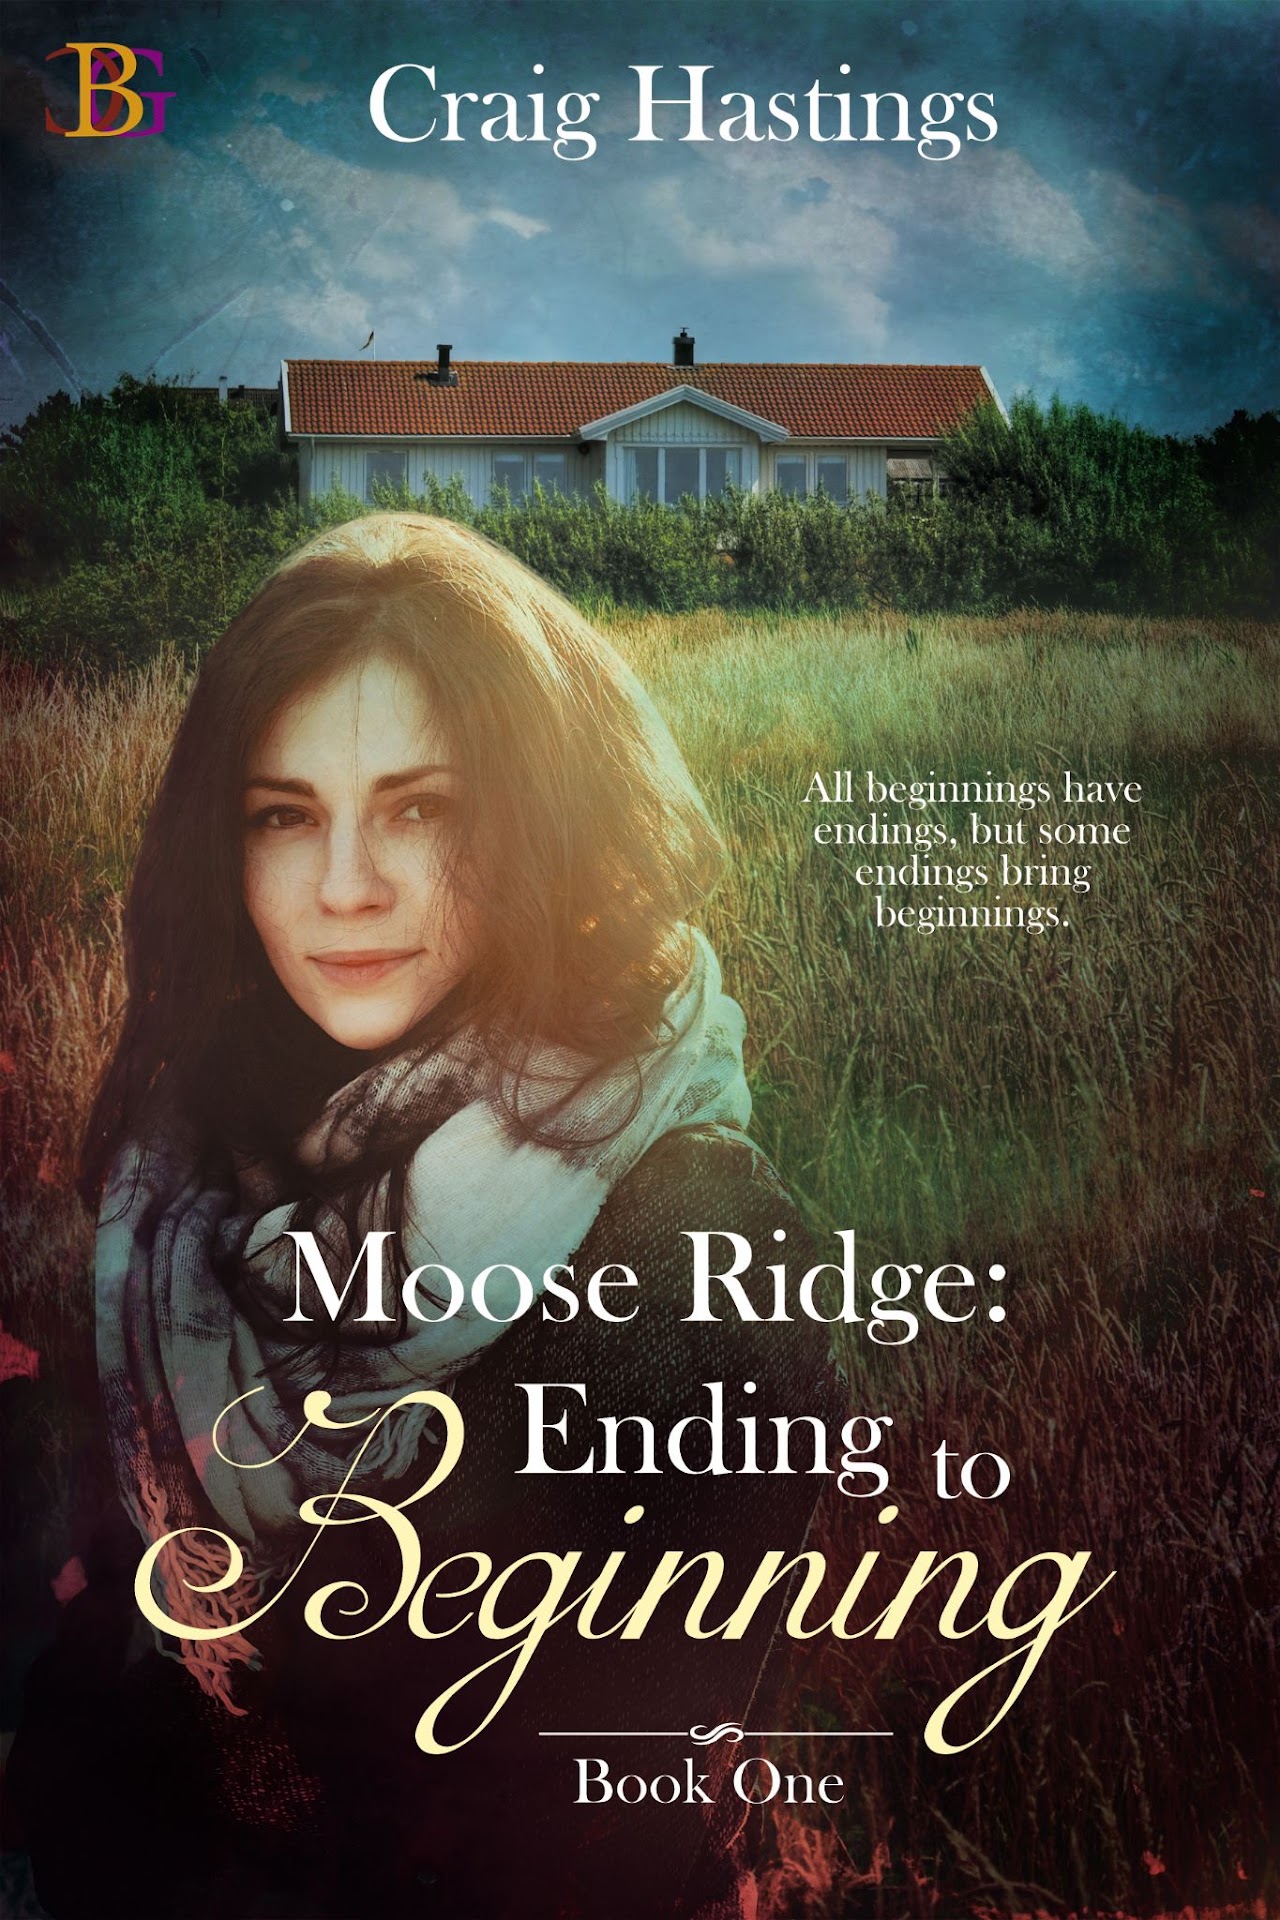 The front cover of Moose Ridge: Ending to Beginning by Craig Hastings